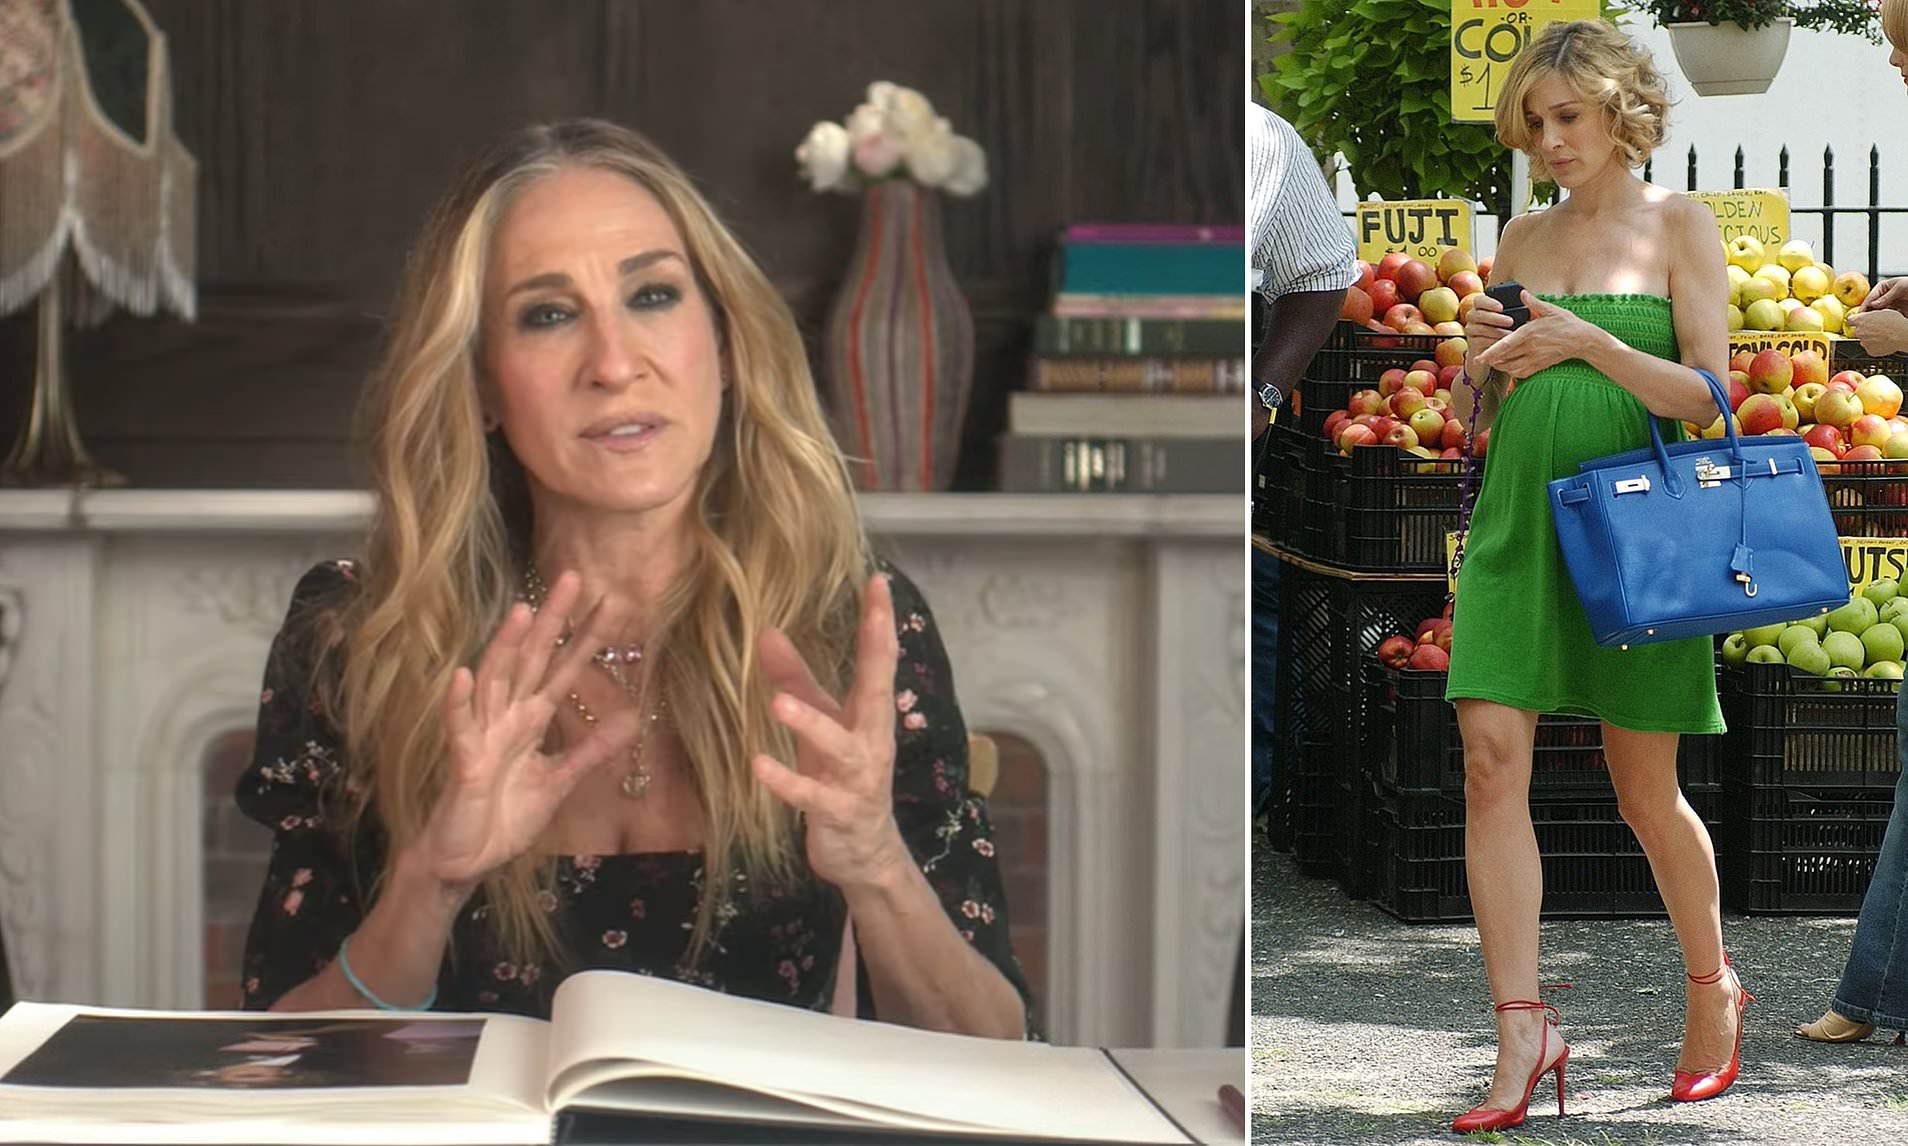 dewi kania recommends sara jessica parker fakes pic